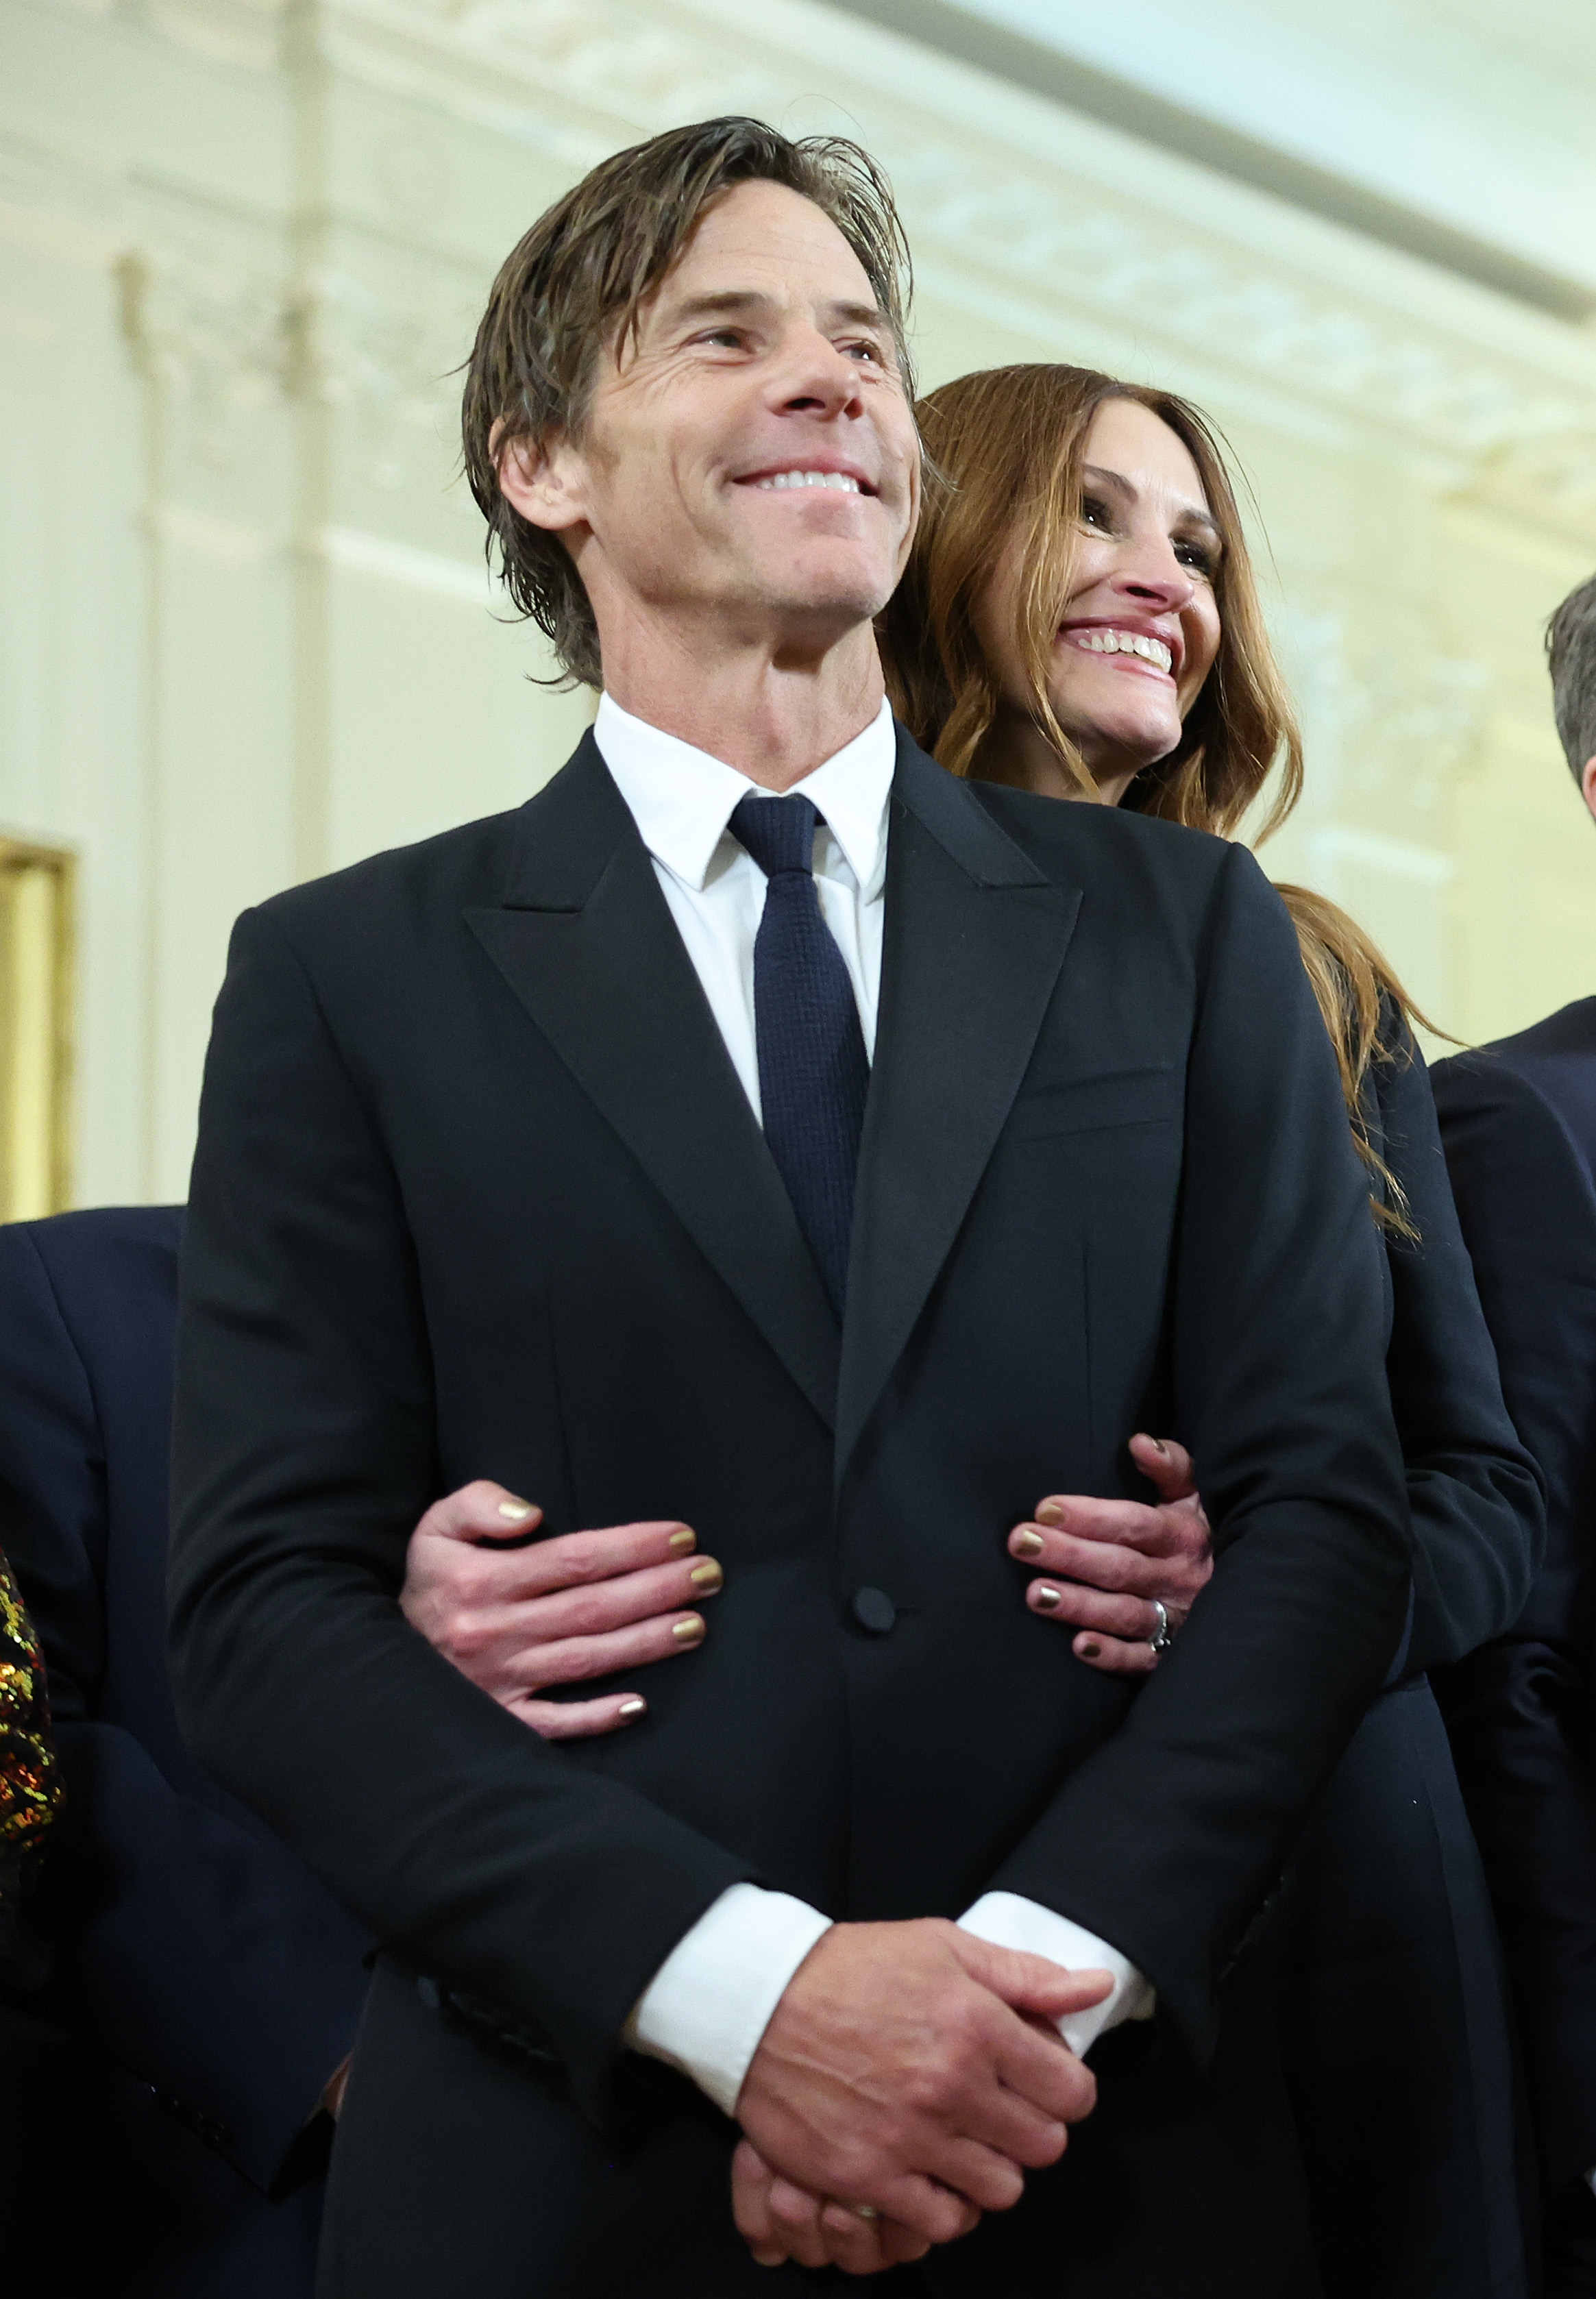 Julia Roberts and Daniel Moder at a White House event